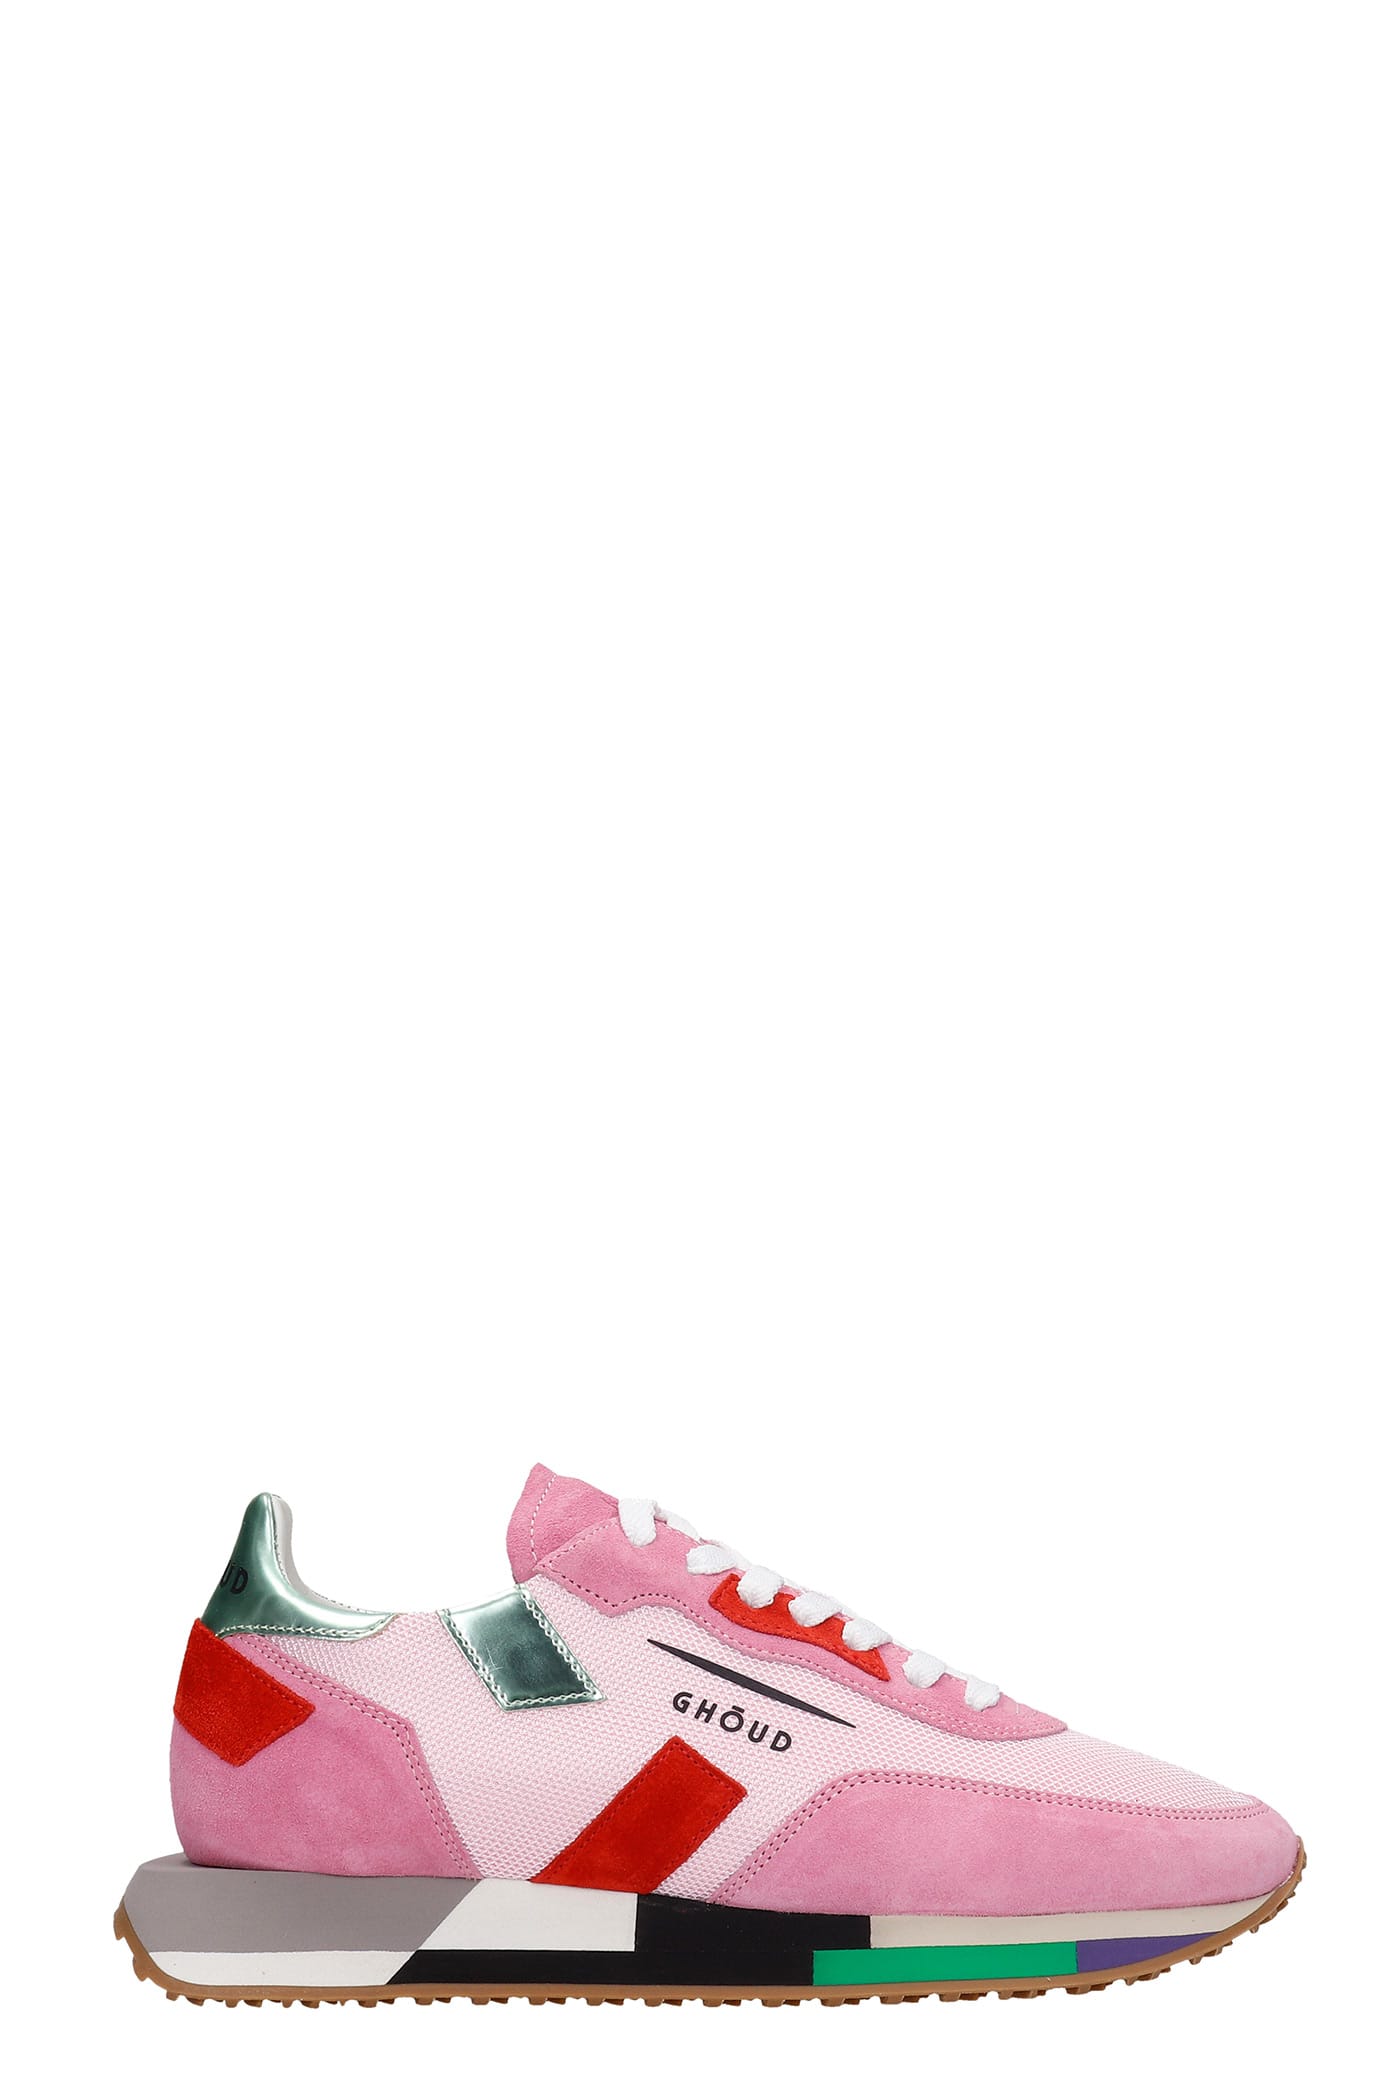 GHOUD Rush Sneakers In Rose-pink Suede And Fabric